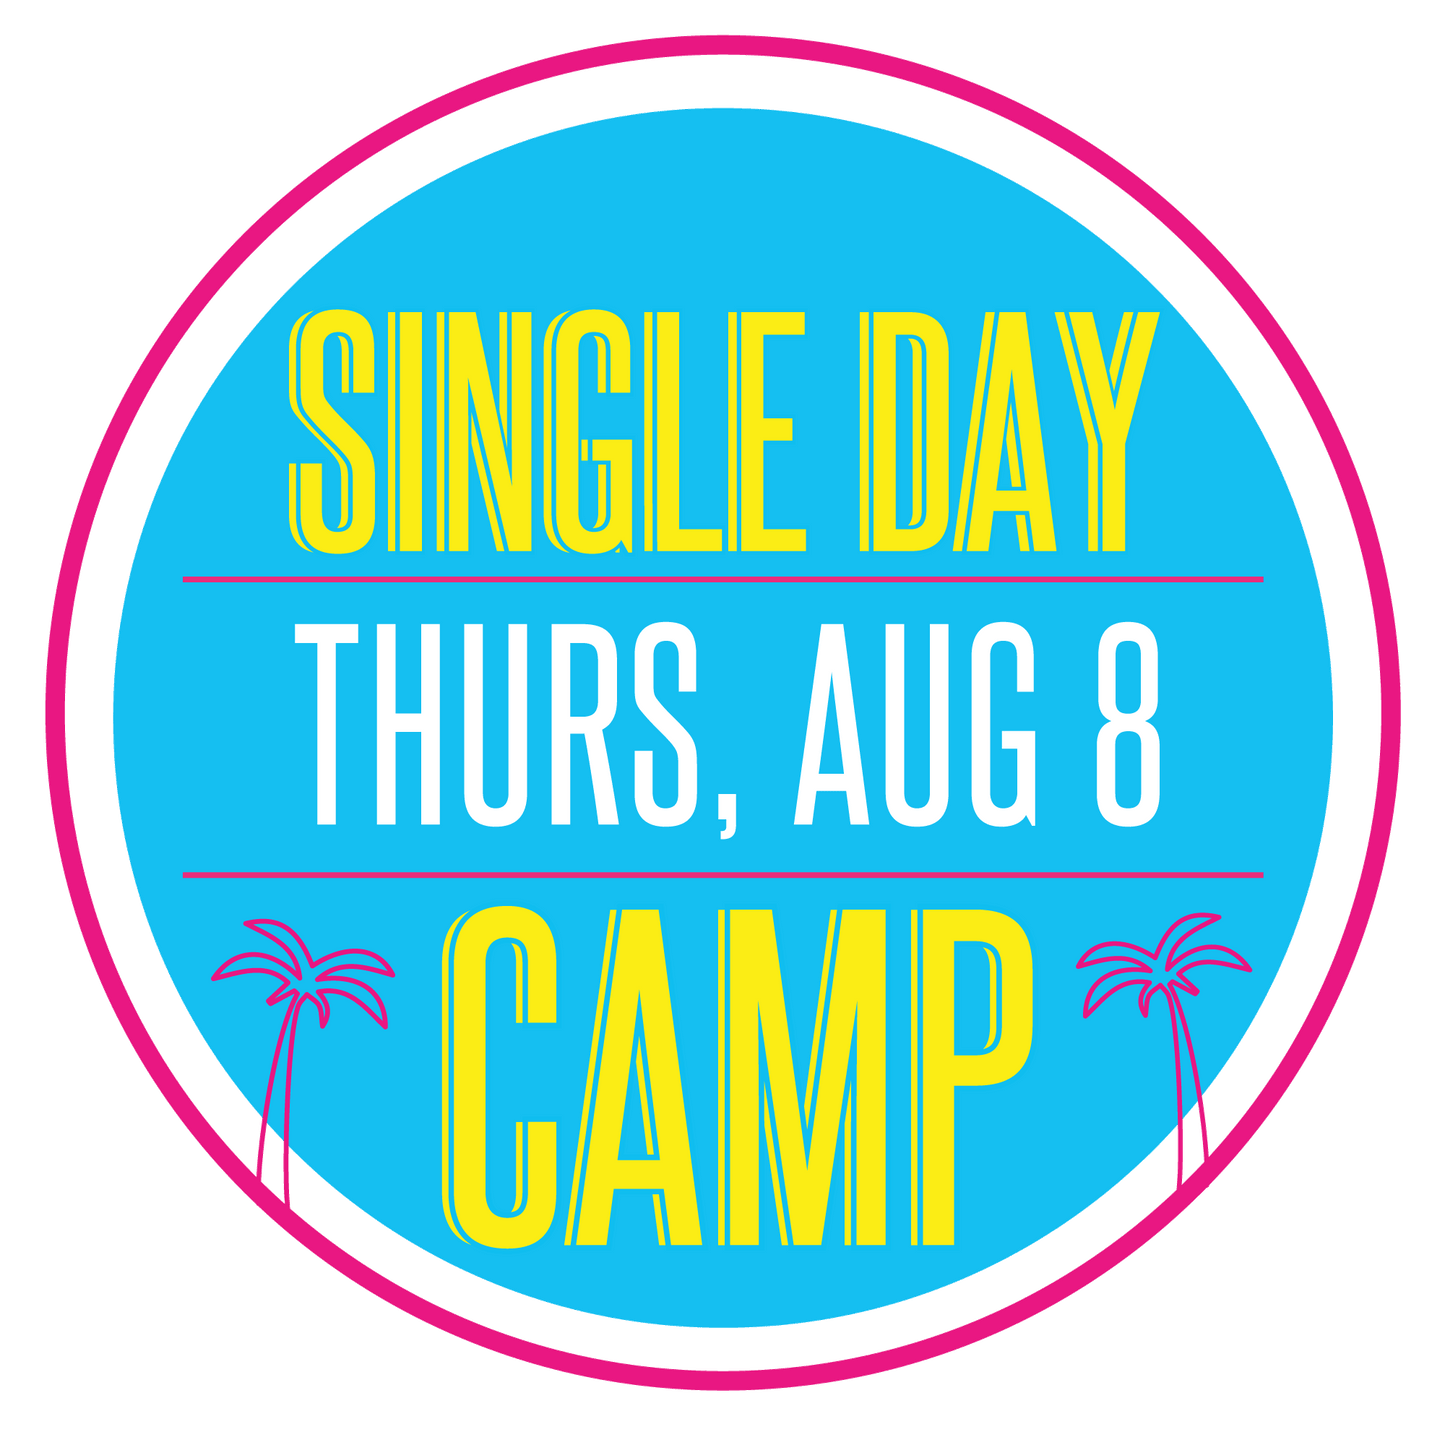 Single Day Sewing Workshop: Thursday, August 8, 9am-3pm